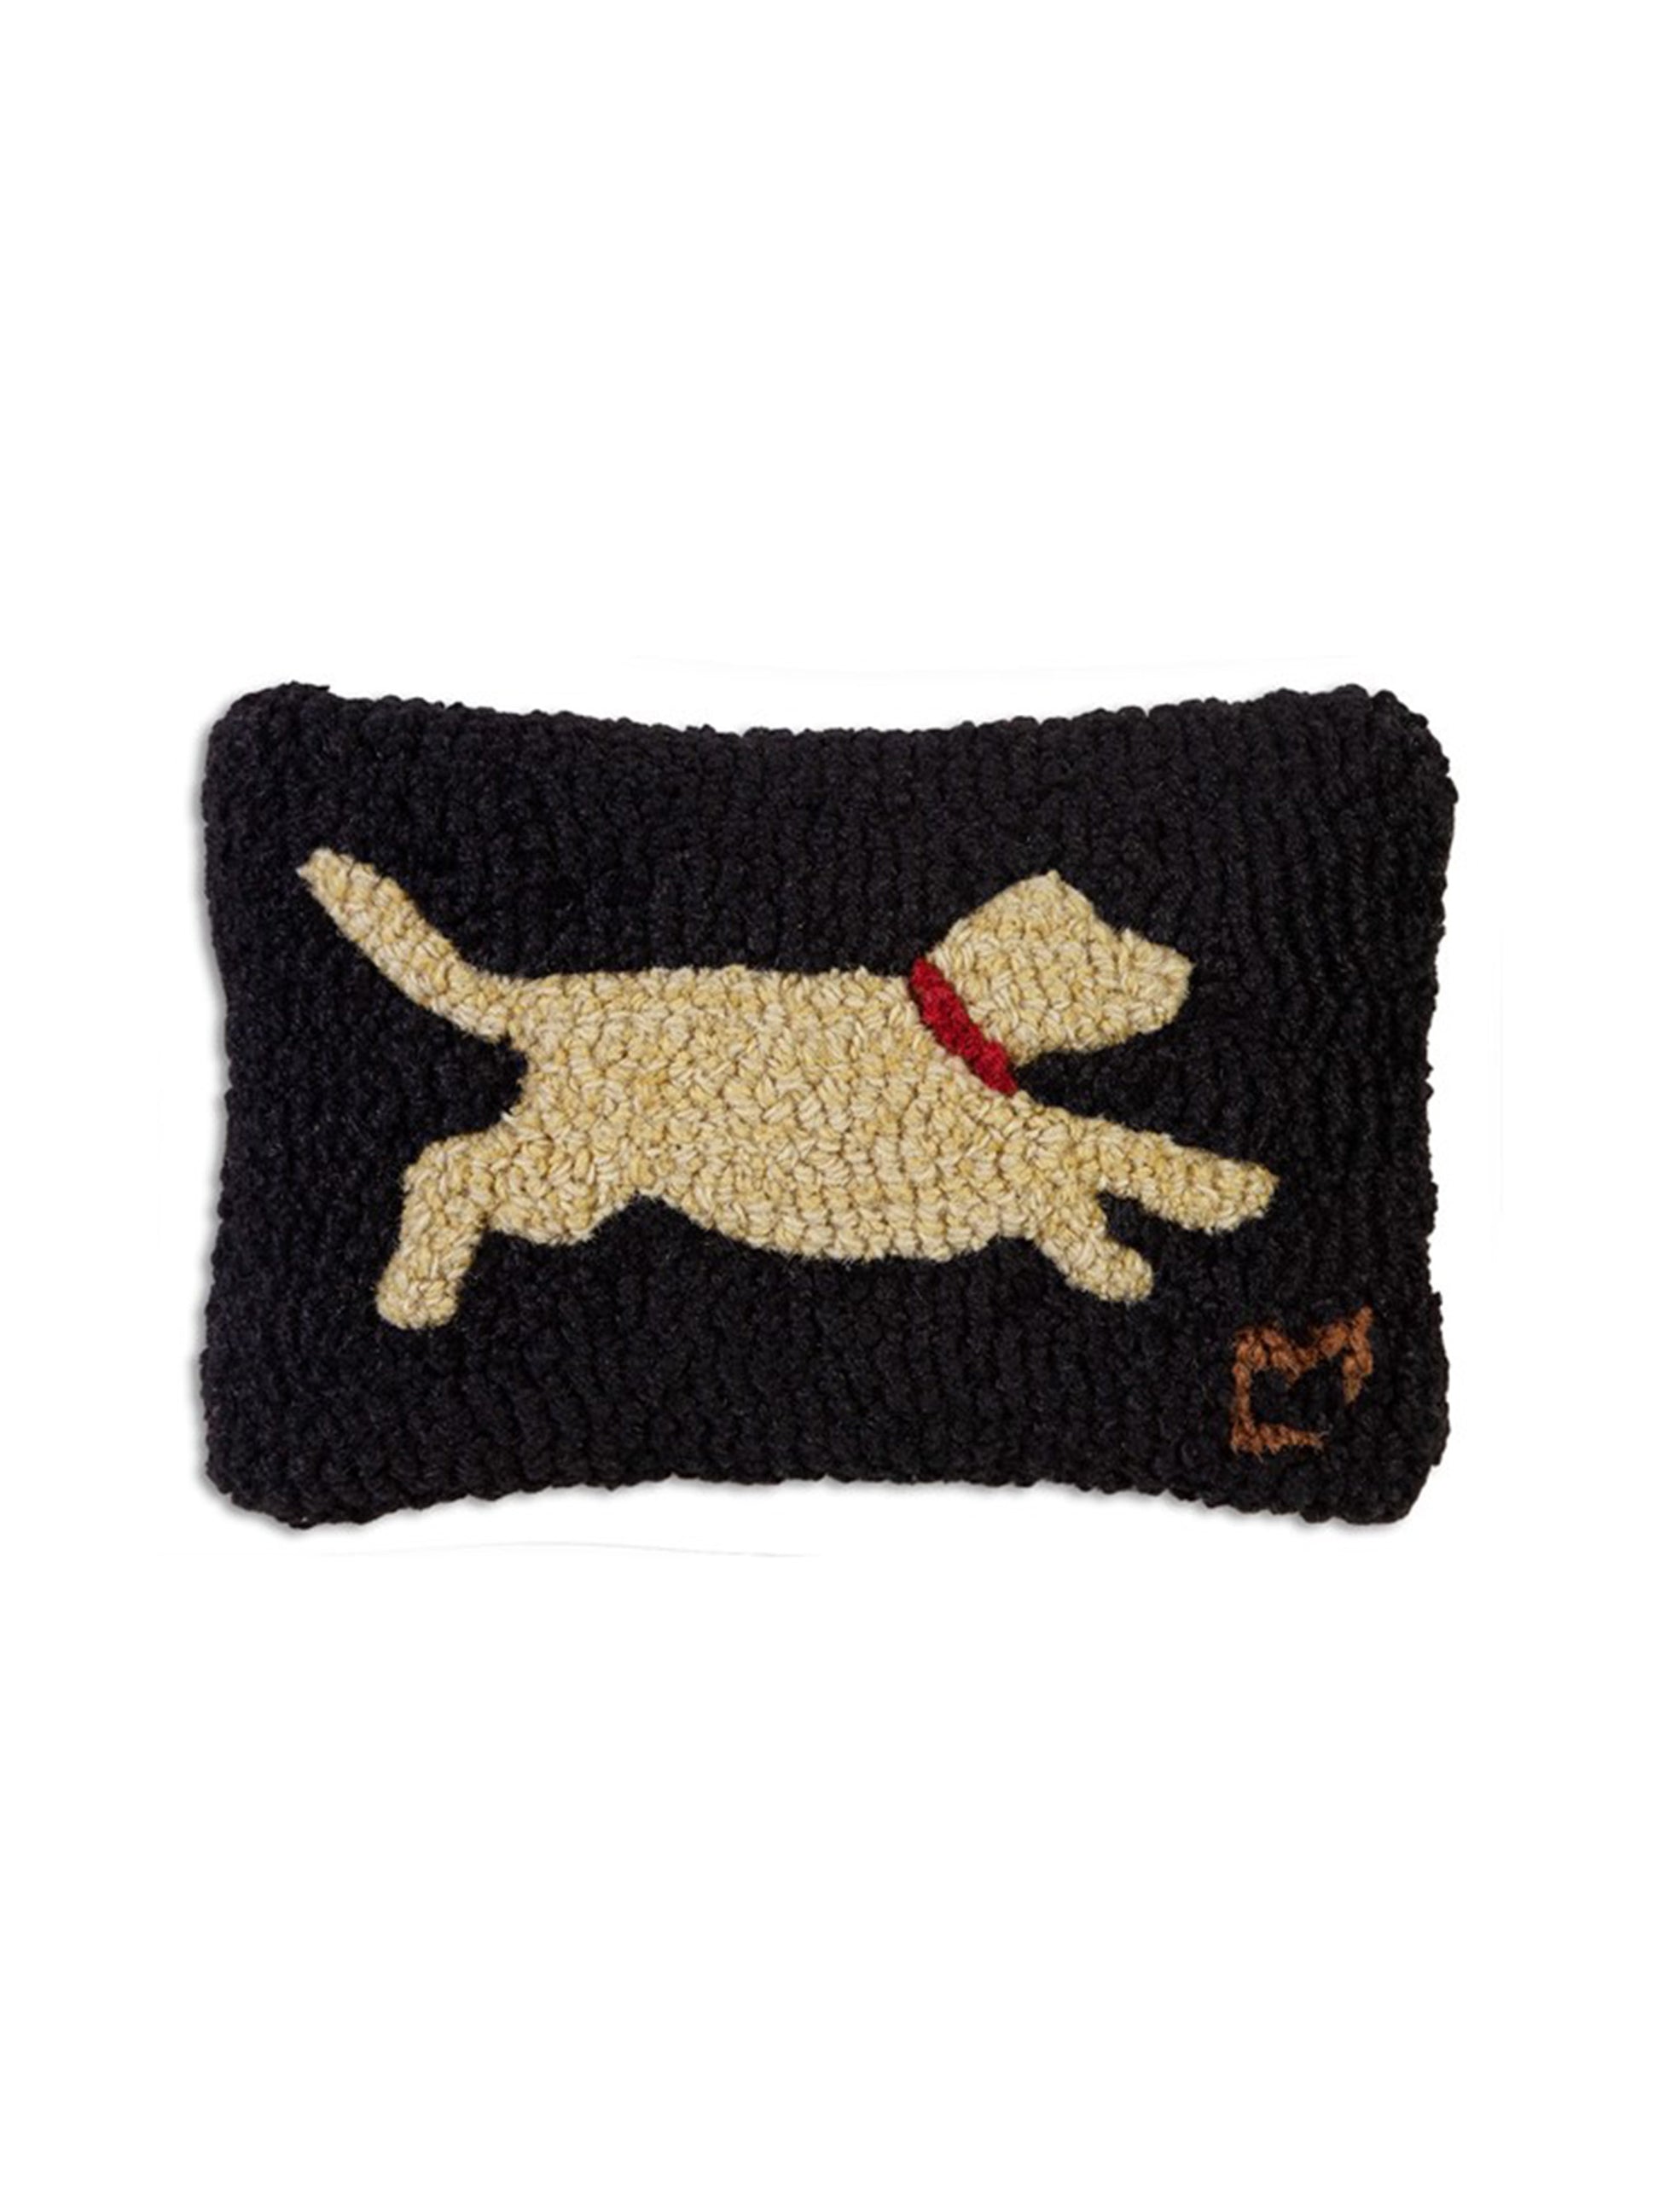 Running Yellow Lab Hooked Wool Pillow Weston Table